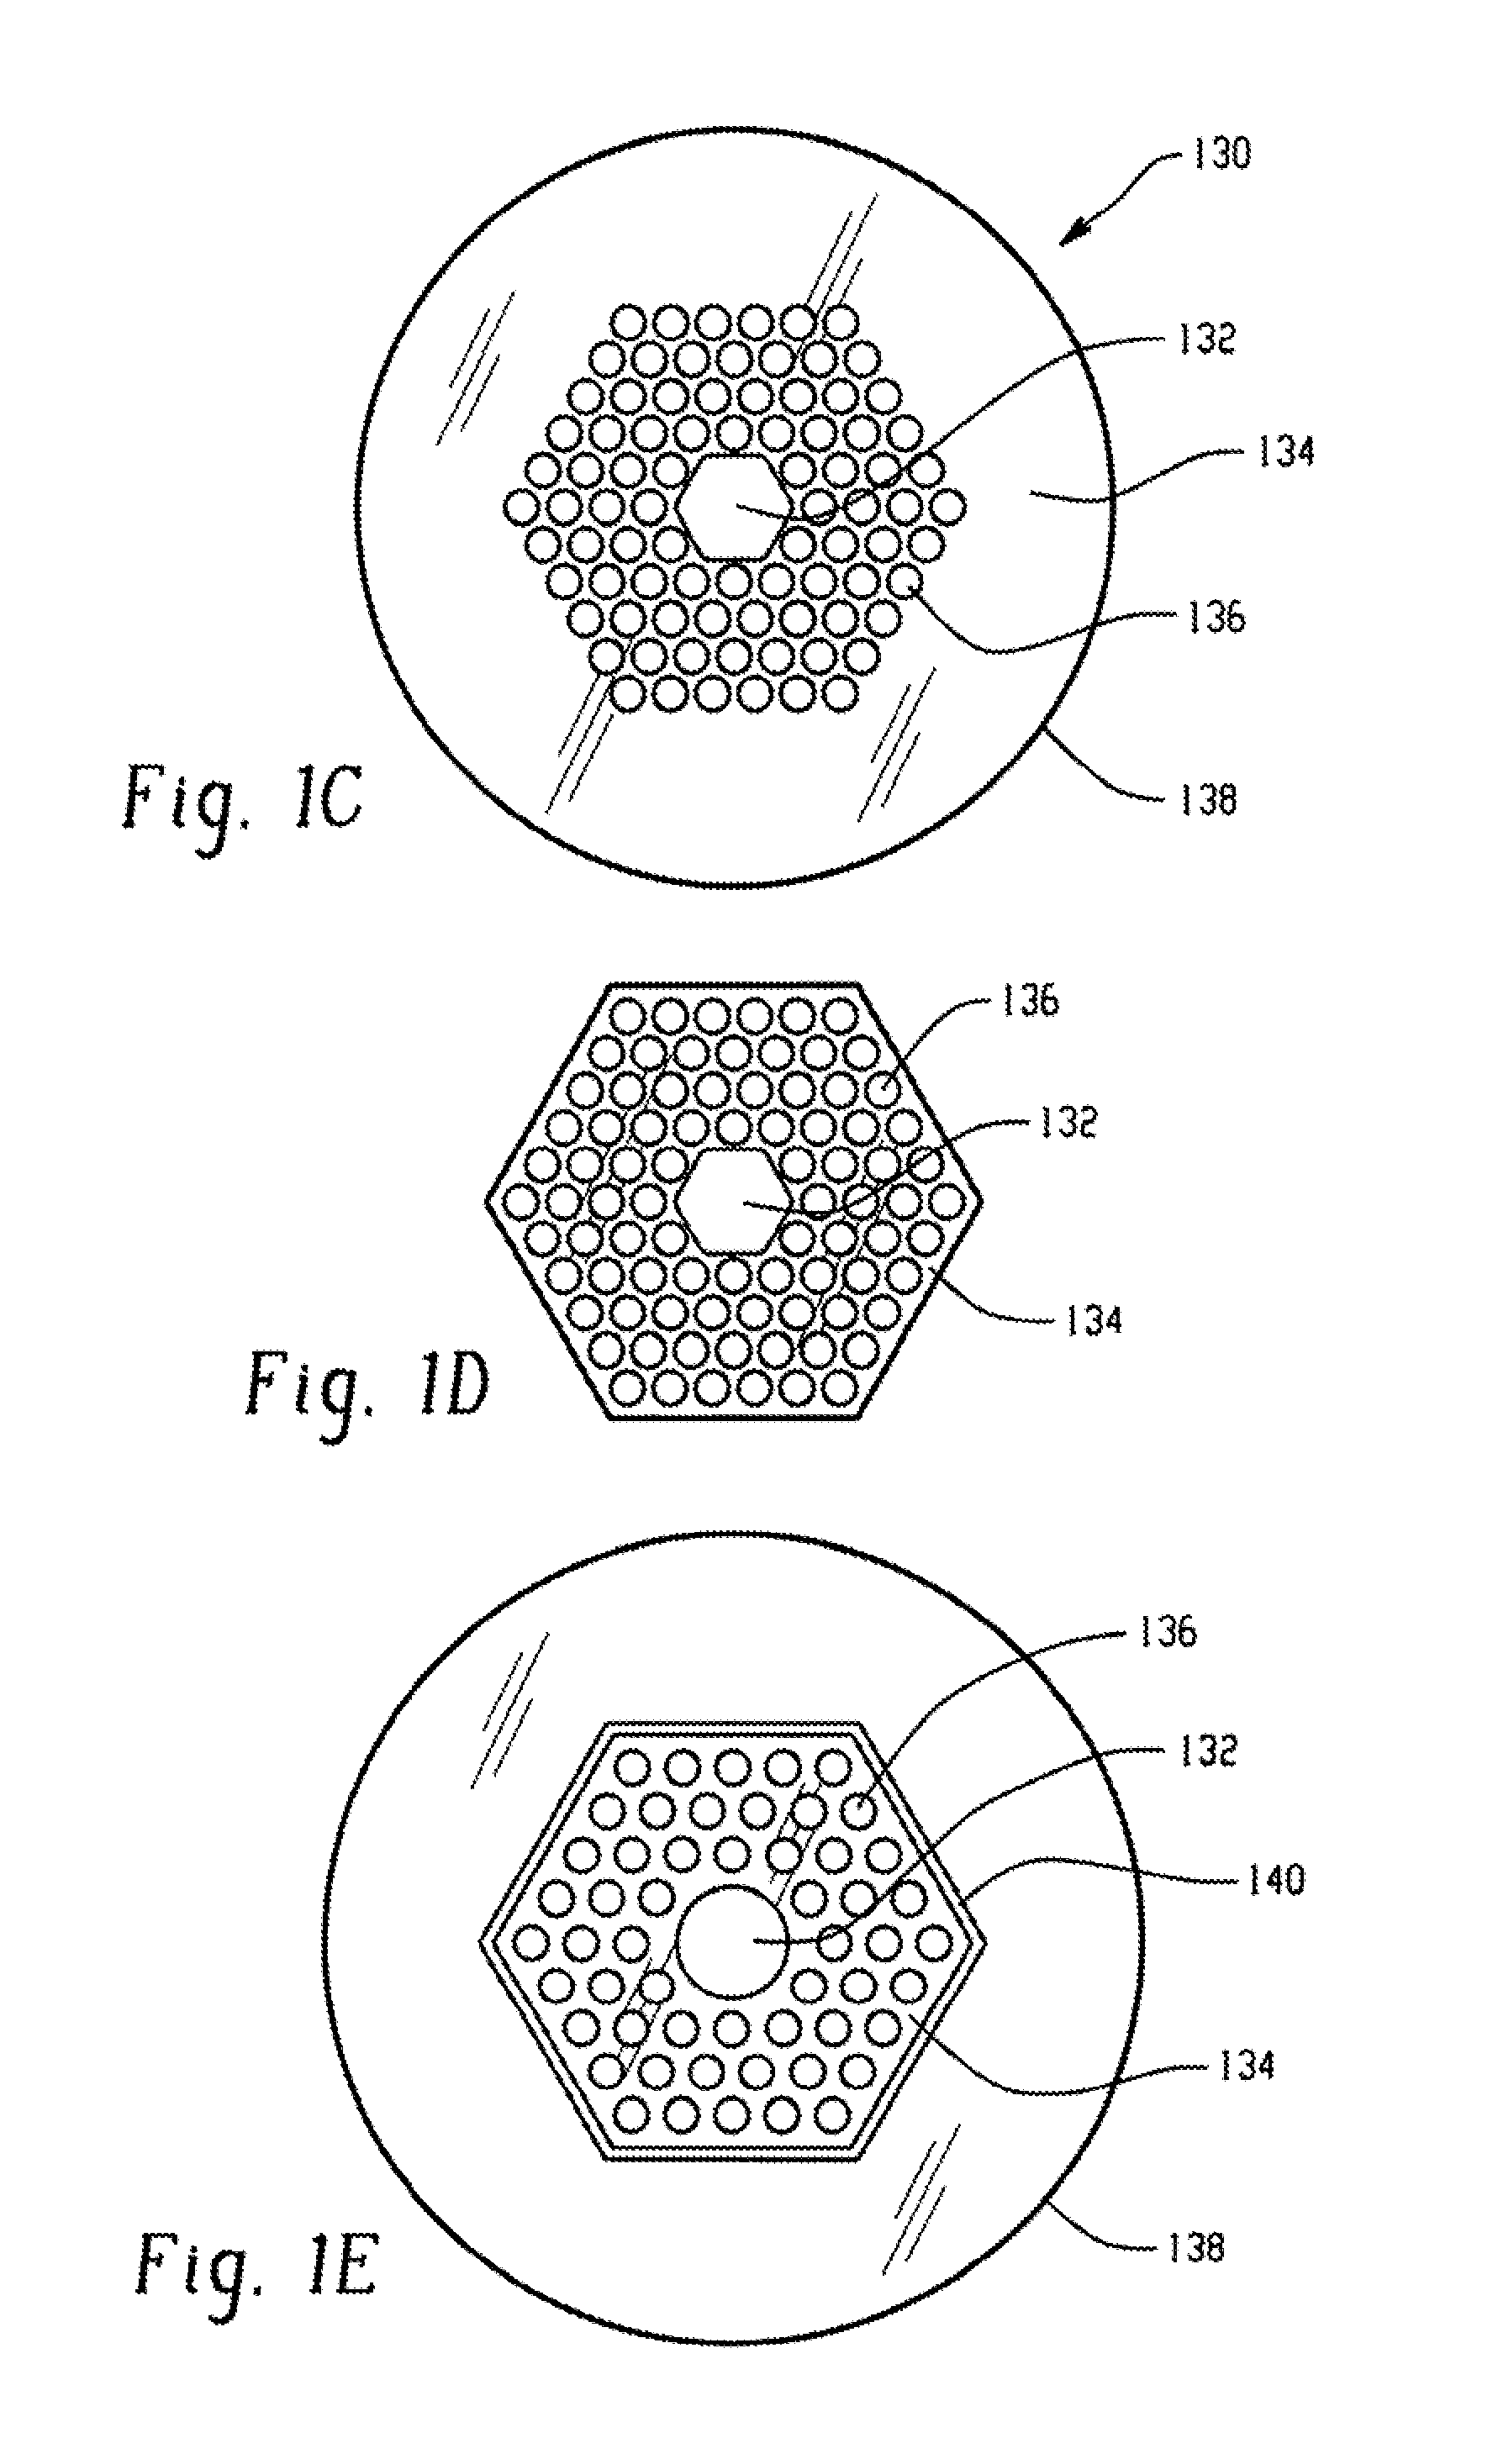 Direct extrusion method for the fabrication of photonic band gap (PBG) fibers and fiber preforms